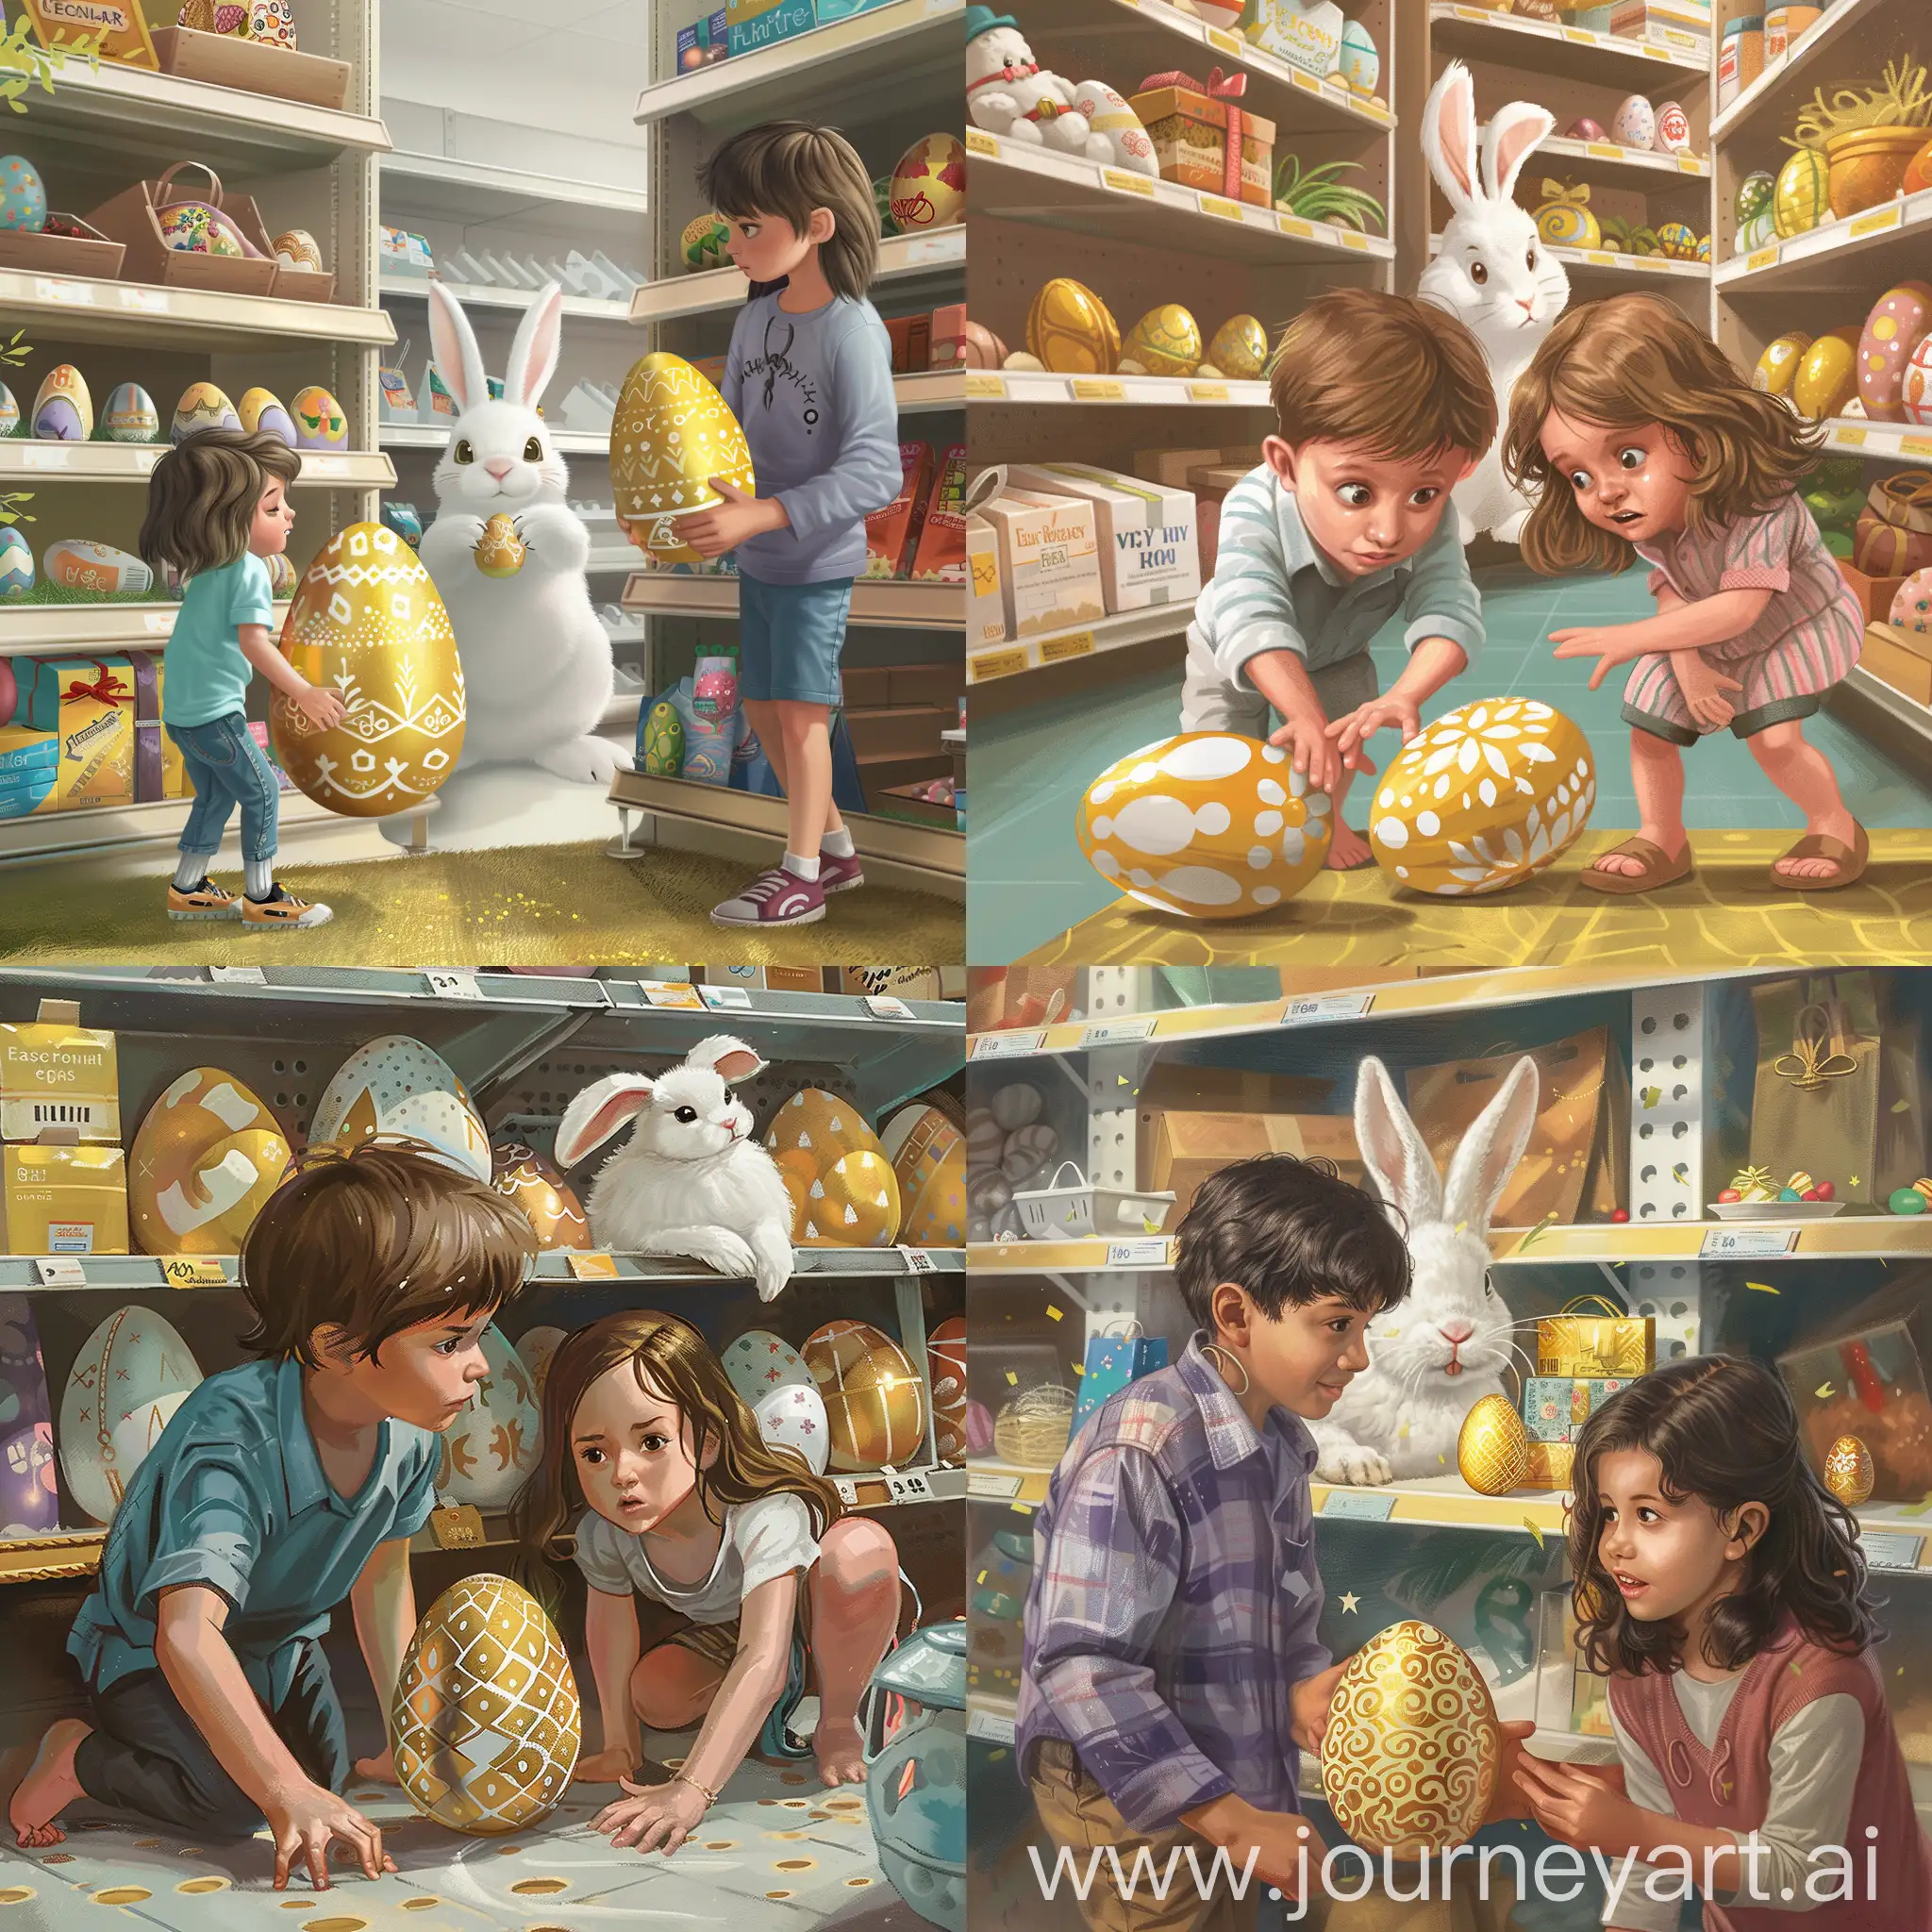 Easter-Egg-Hunt-Kids-Searching-for-Golden-and-White-Easter-Egg-with-Easter-Bunny-in-Retail-Store